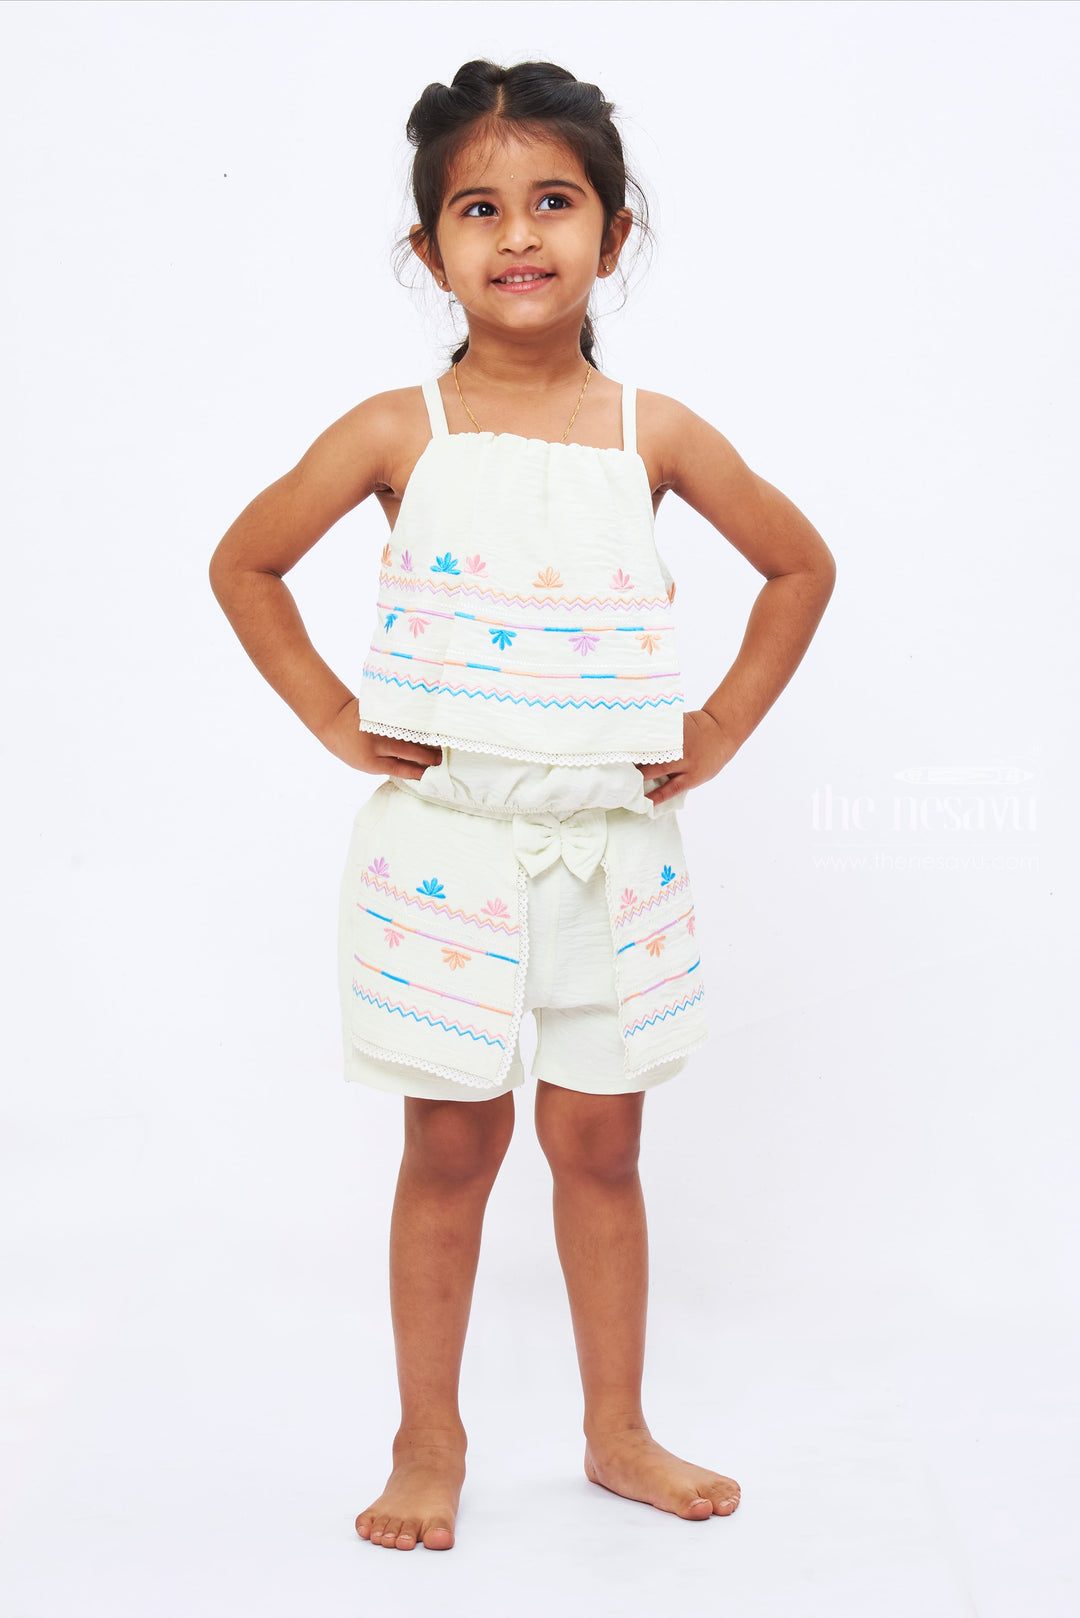 The Nesavu Baby Casual Sets Girls' Embroidered White Top and Shorts Set - Playful Lace Trim Detailing Nesavu 18 (2Y) / Half white BFJ511B-18 Embroidered White Summer Set for Girls | Playwear with Lace Trims | The Nesavu